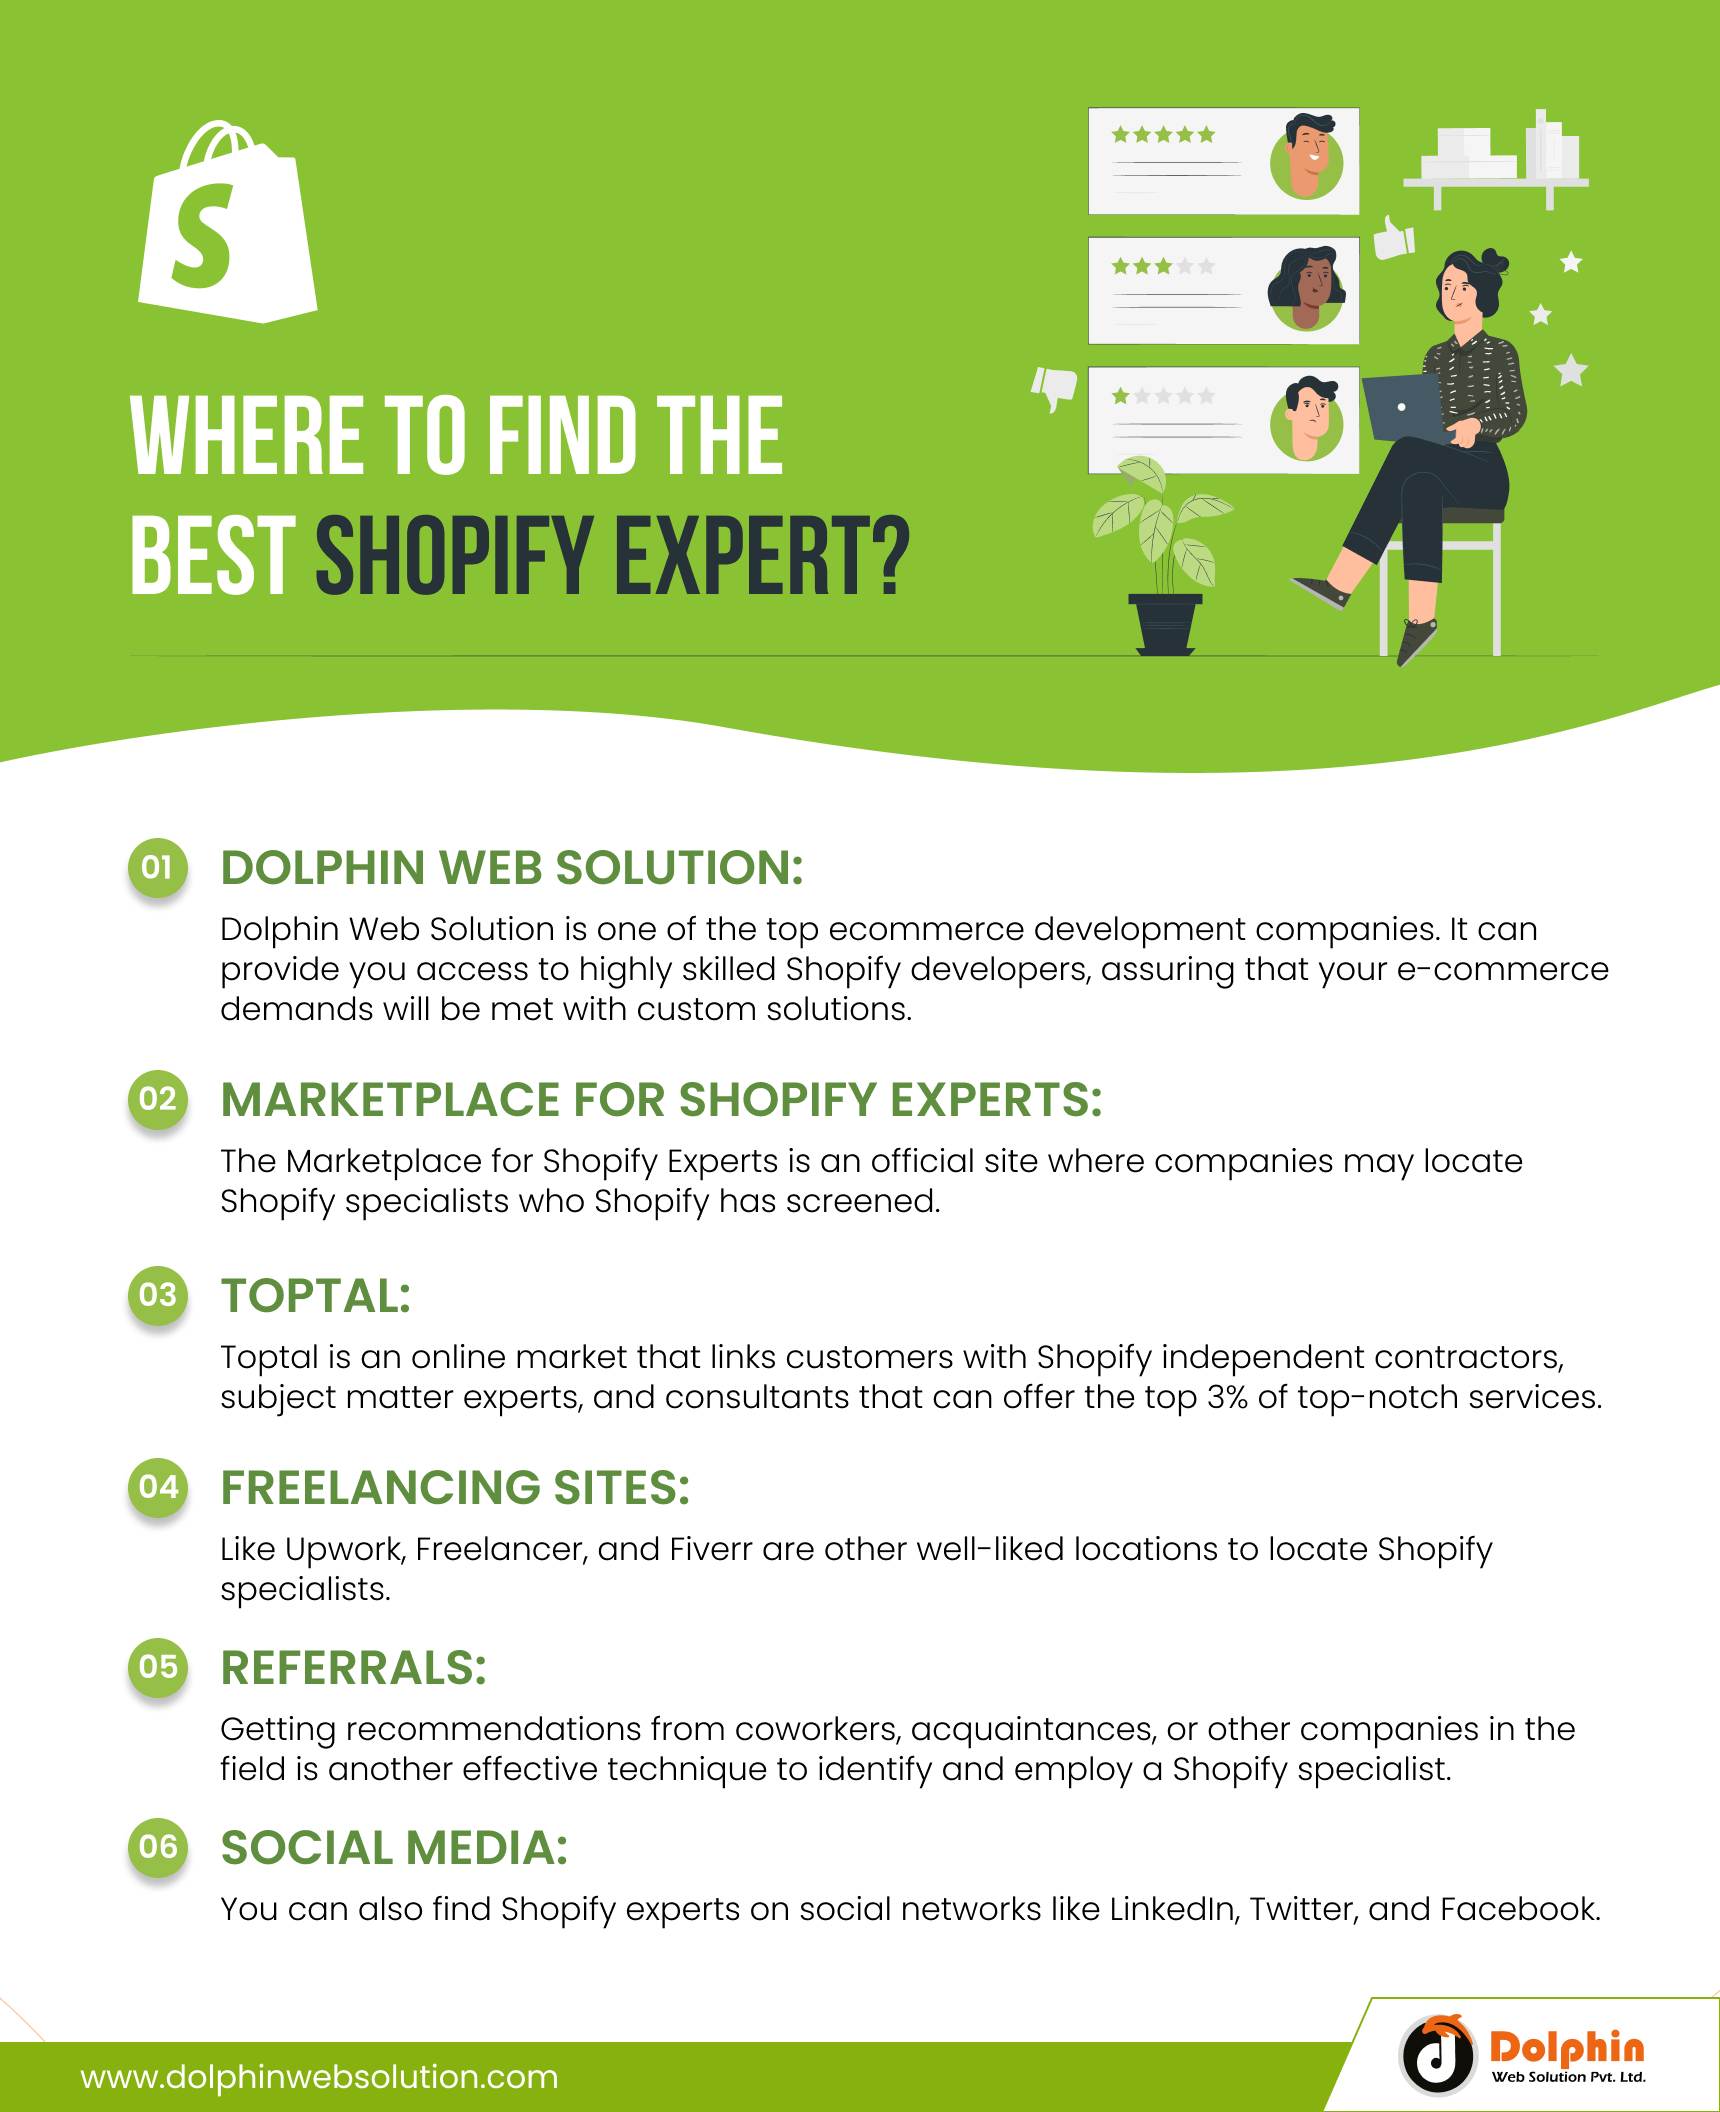 Find the Best Shopify Expert